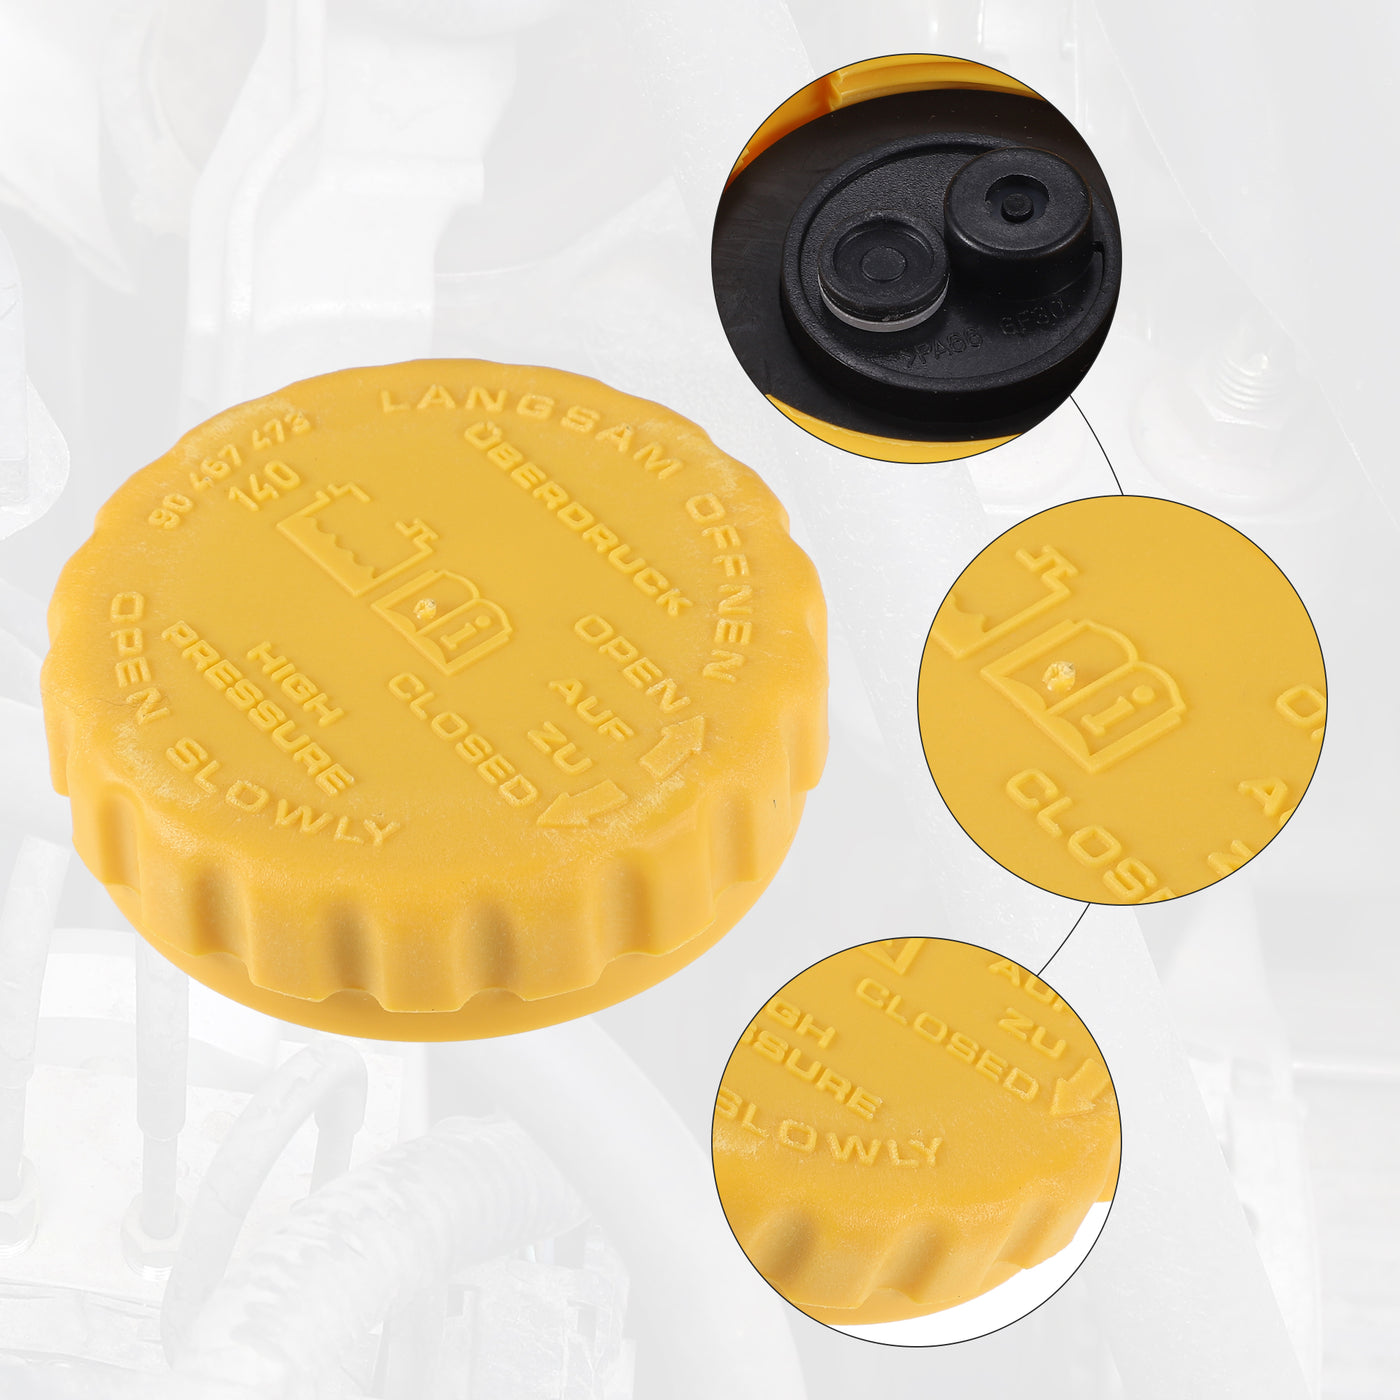 ACROPIX Windshield Washer Fluid Reservoir Bottle Cap Cover Fit for Cadillac Catera 1997-2001 No.90467473/90500007 - Pack of 1 Yellow